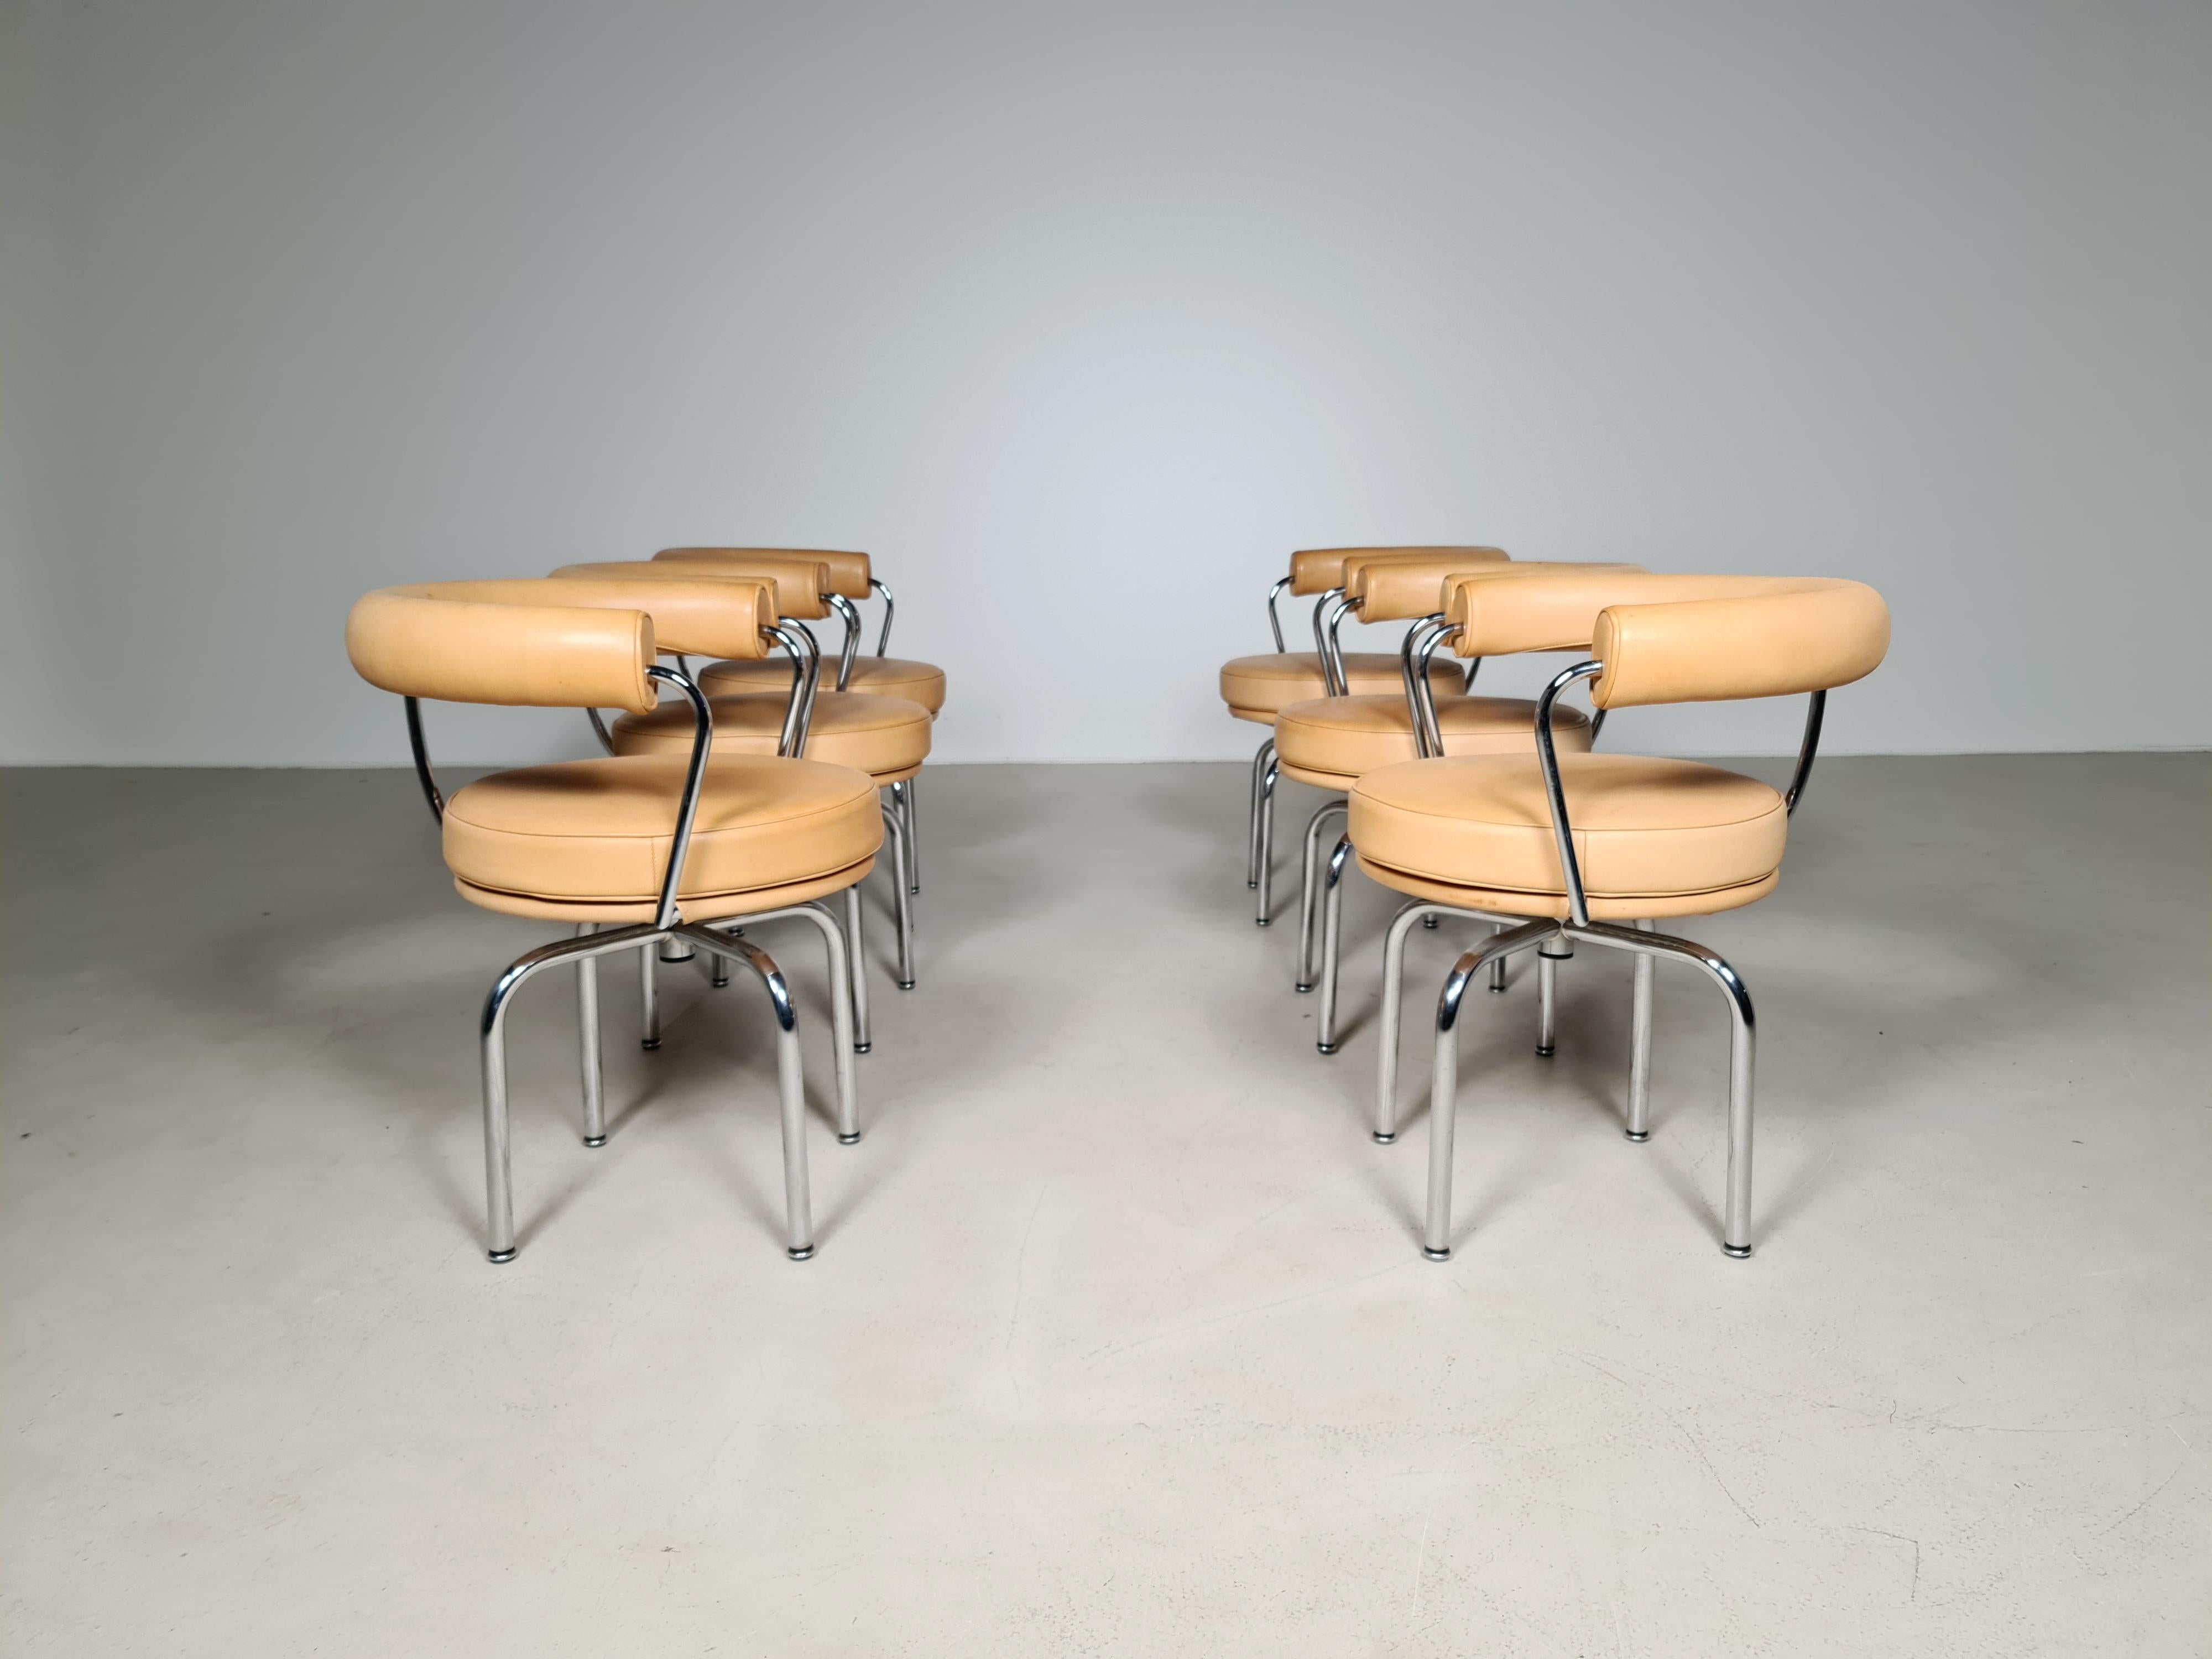 European Set of 6 Lc7 Swivel Chairs by Charlotte Perriand for Cassina, 1990s